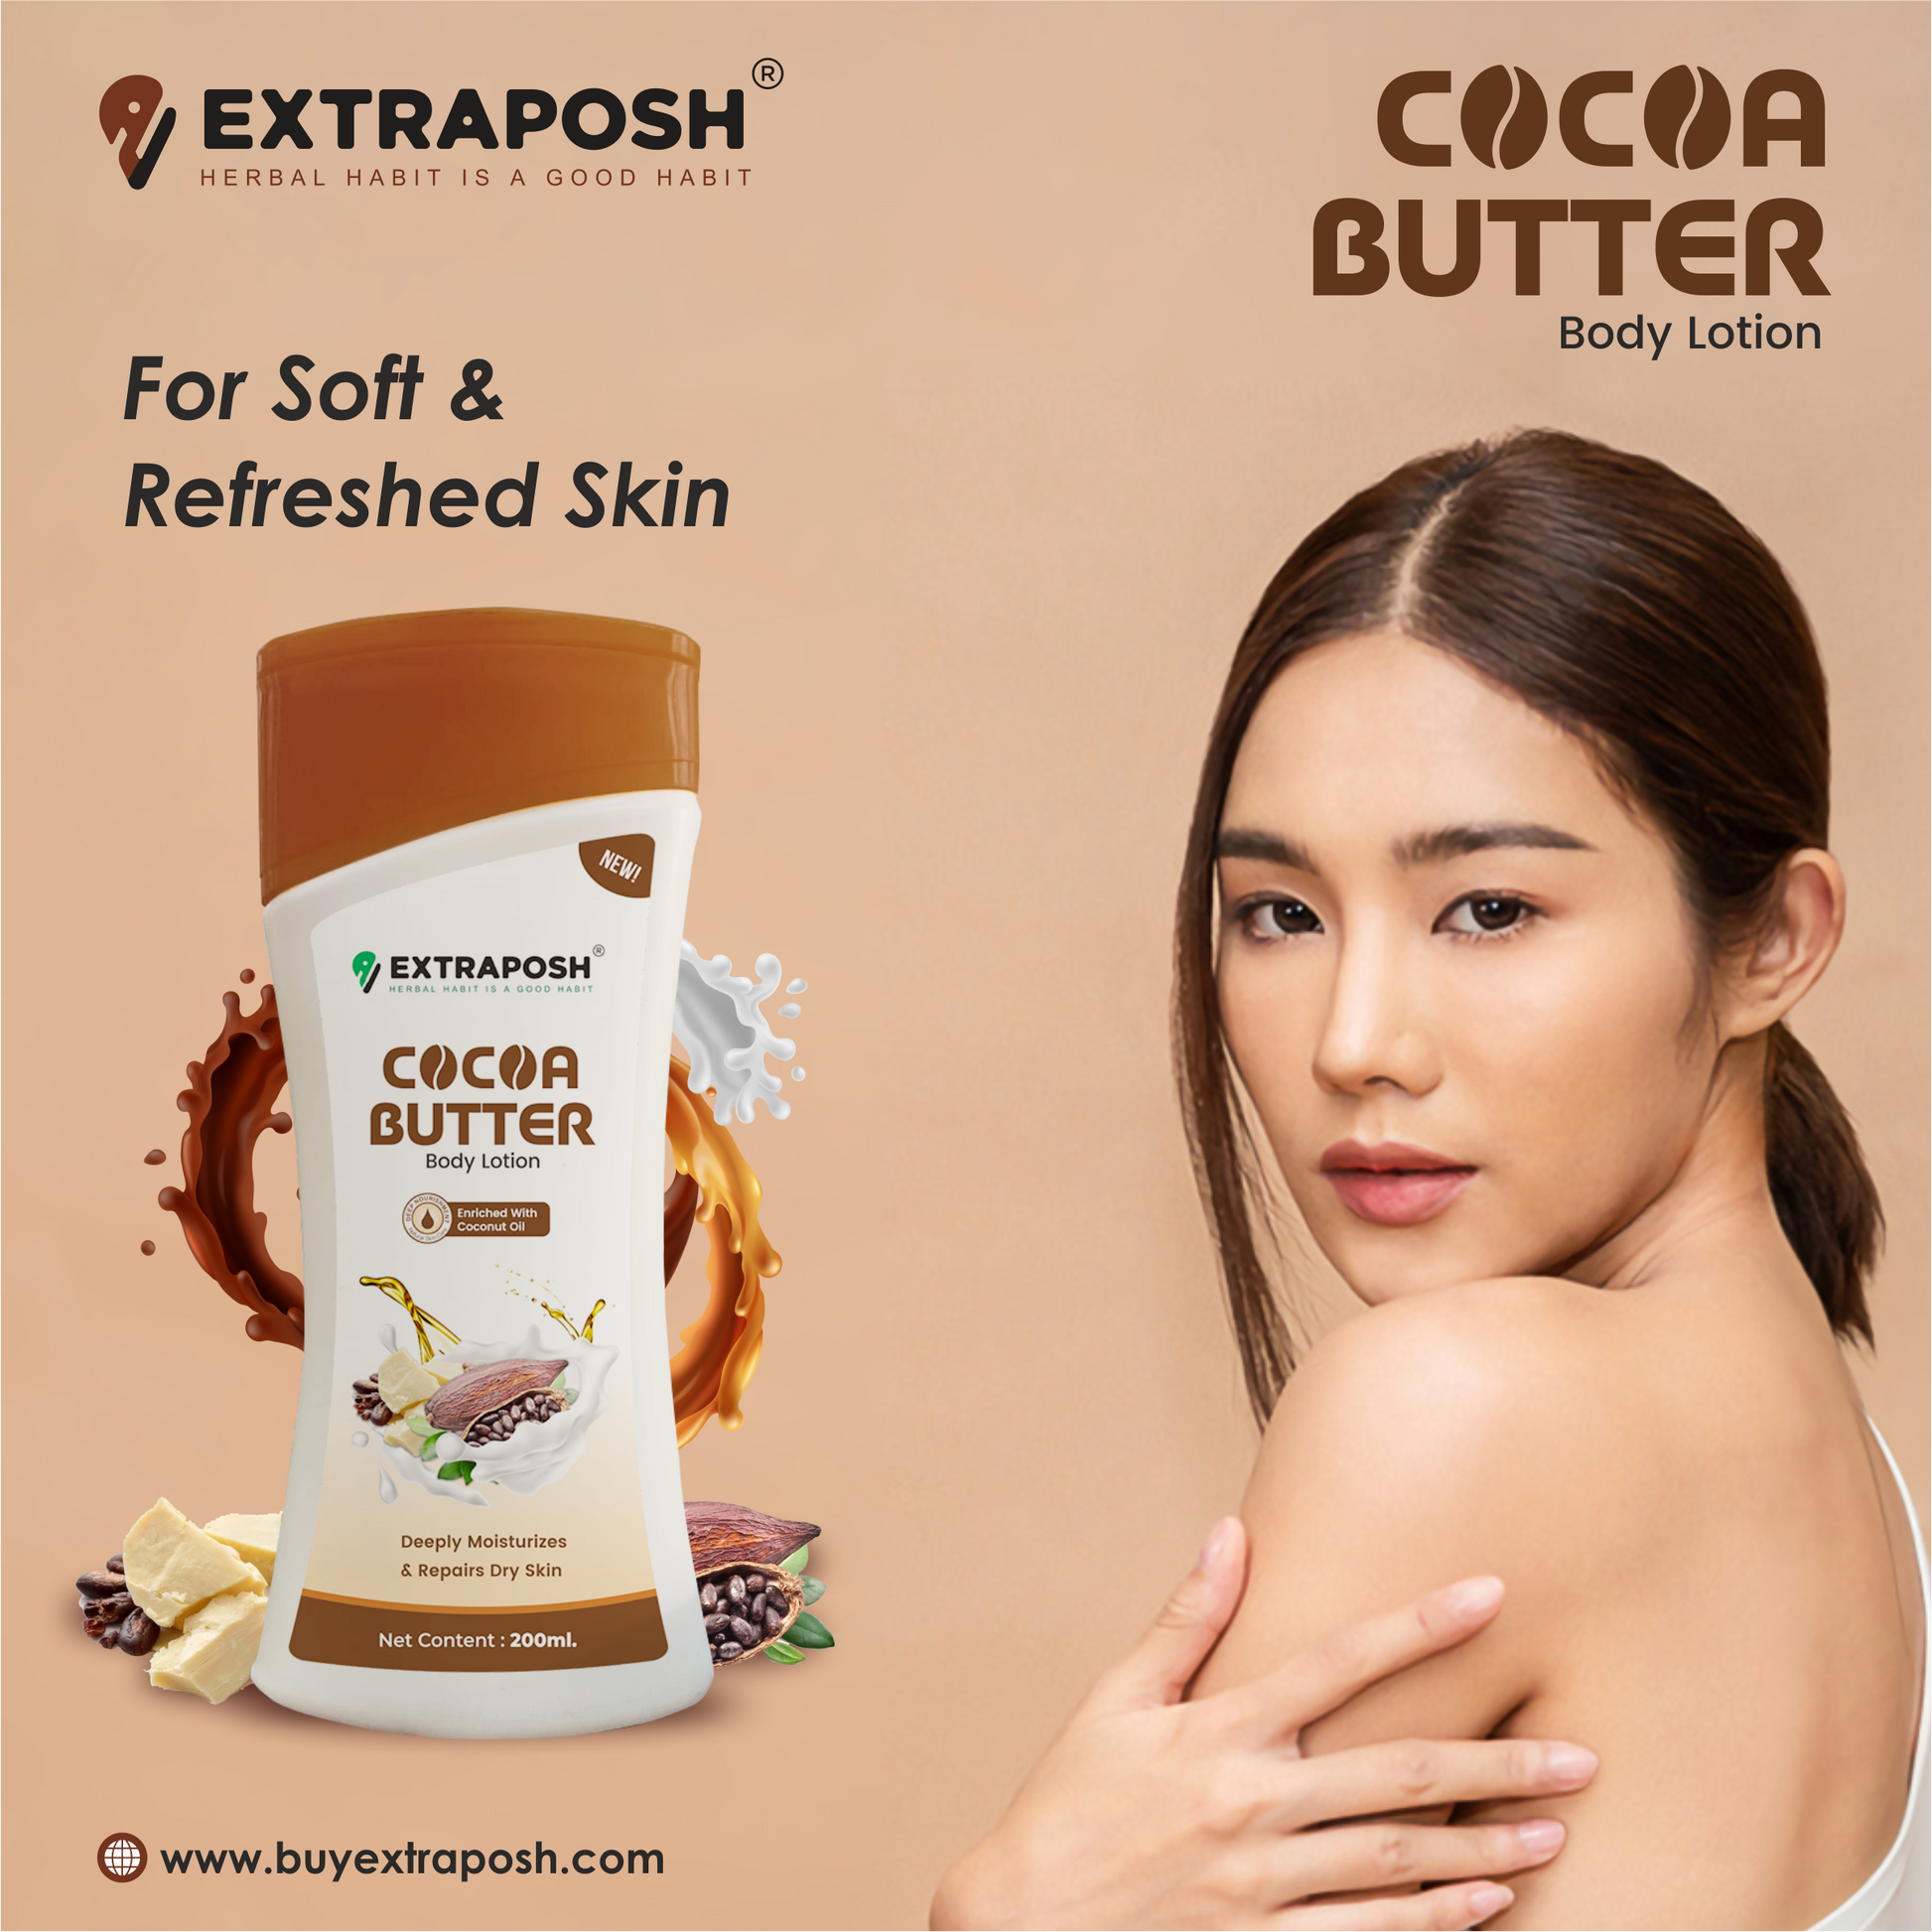 Cocoa Butter Long Lasting Body Lotion/ Daily moisturizer for dry skin